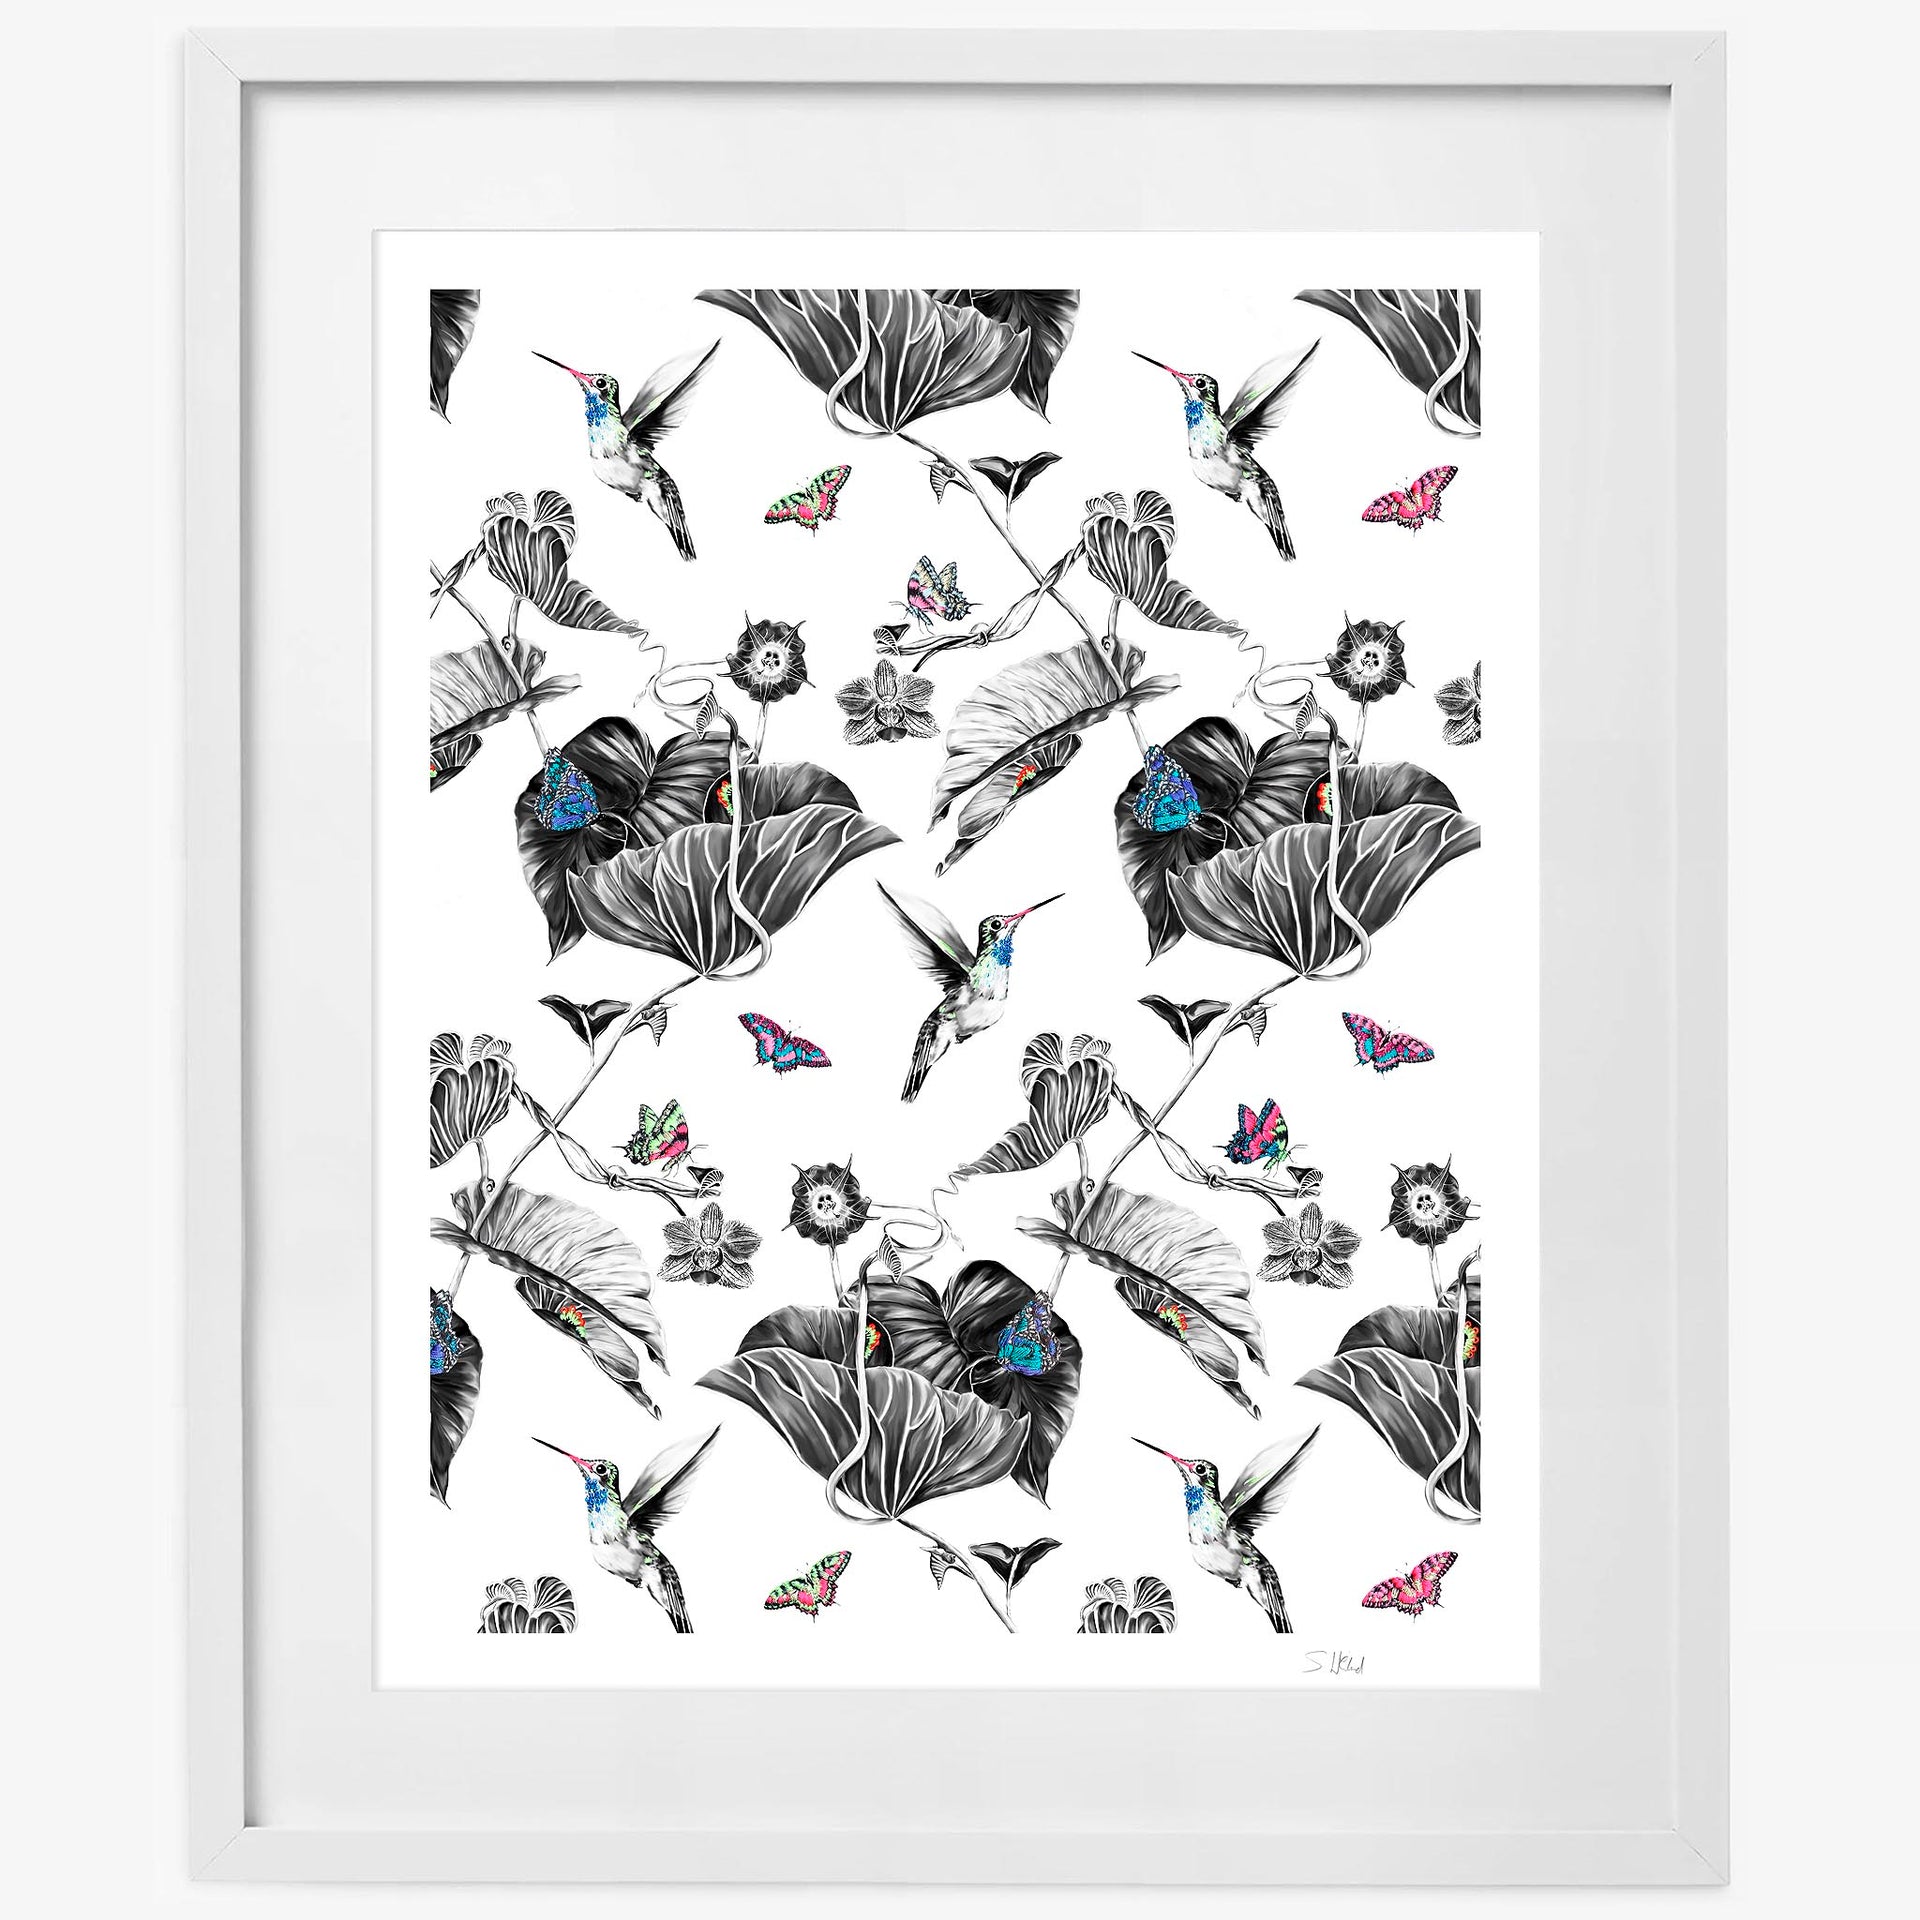 Hummingbird limited edition print in white frame